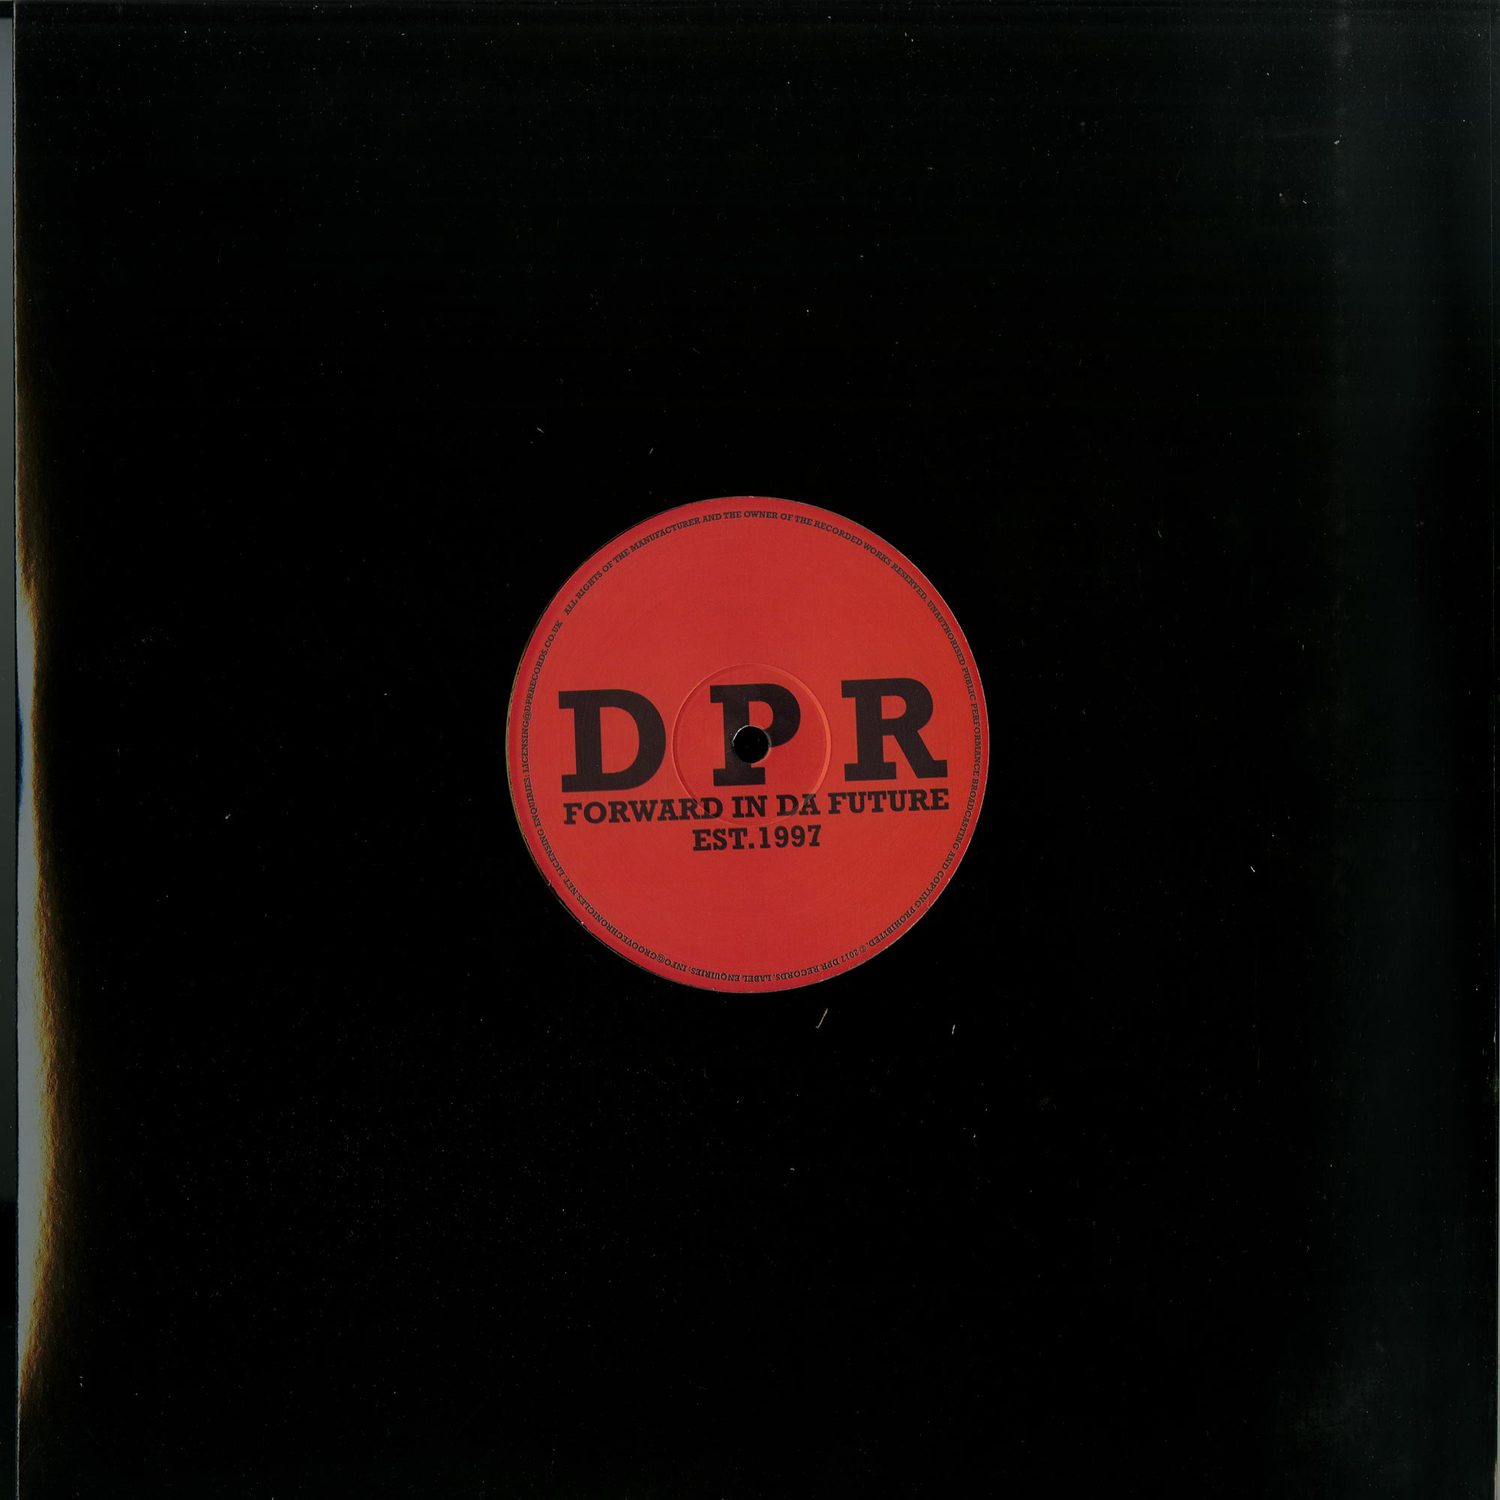 Noodles Groovechronicles - DPR 029